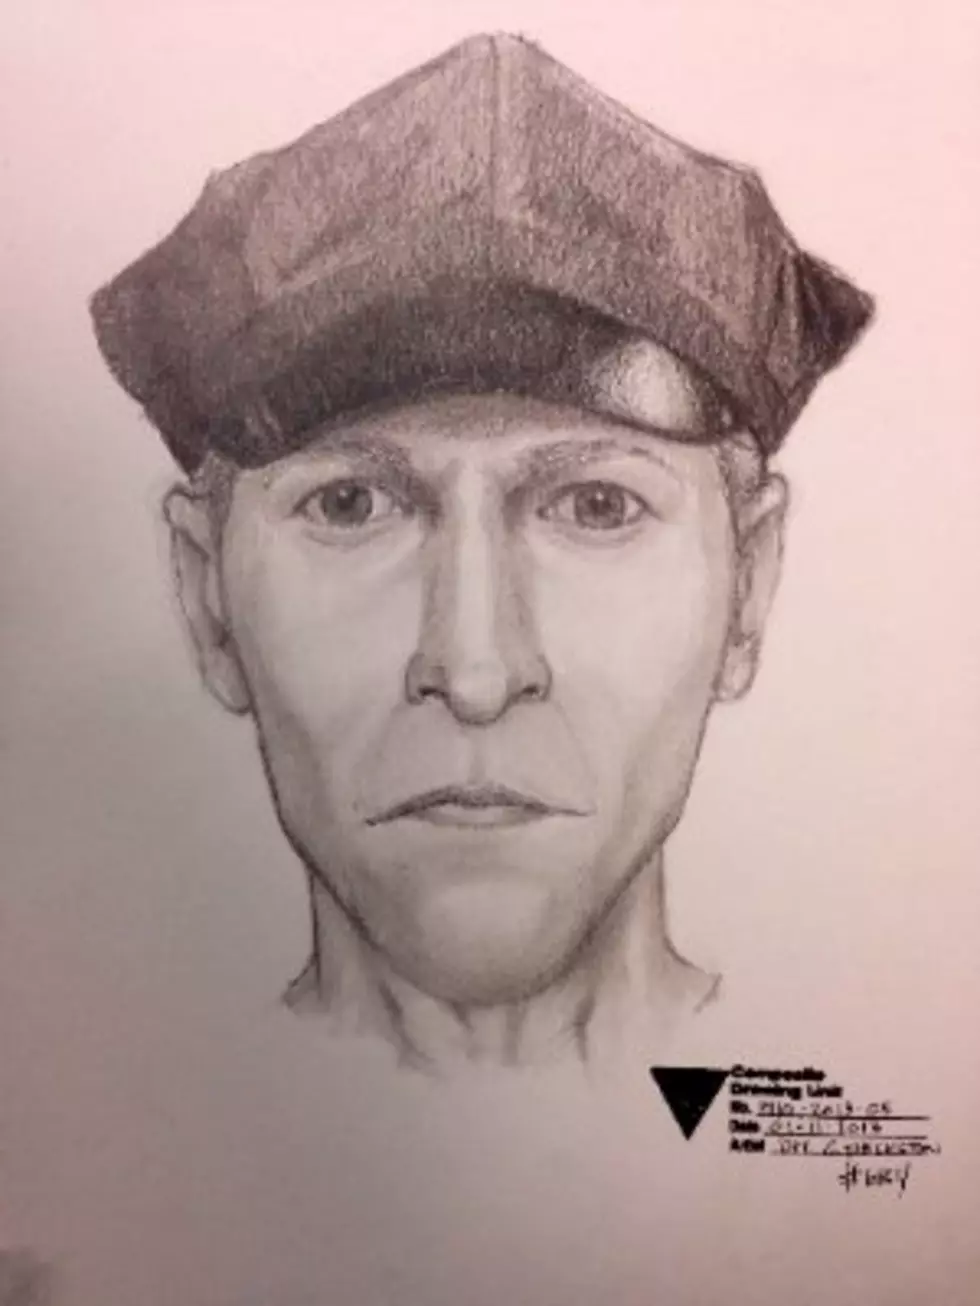 Cops Looking for Police Officer Impersonator in Absecon